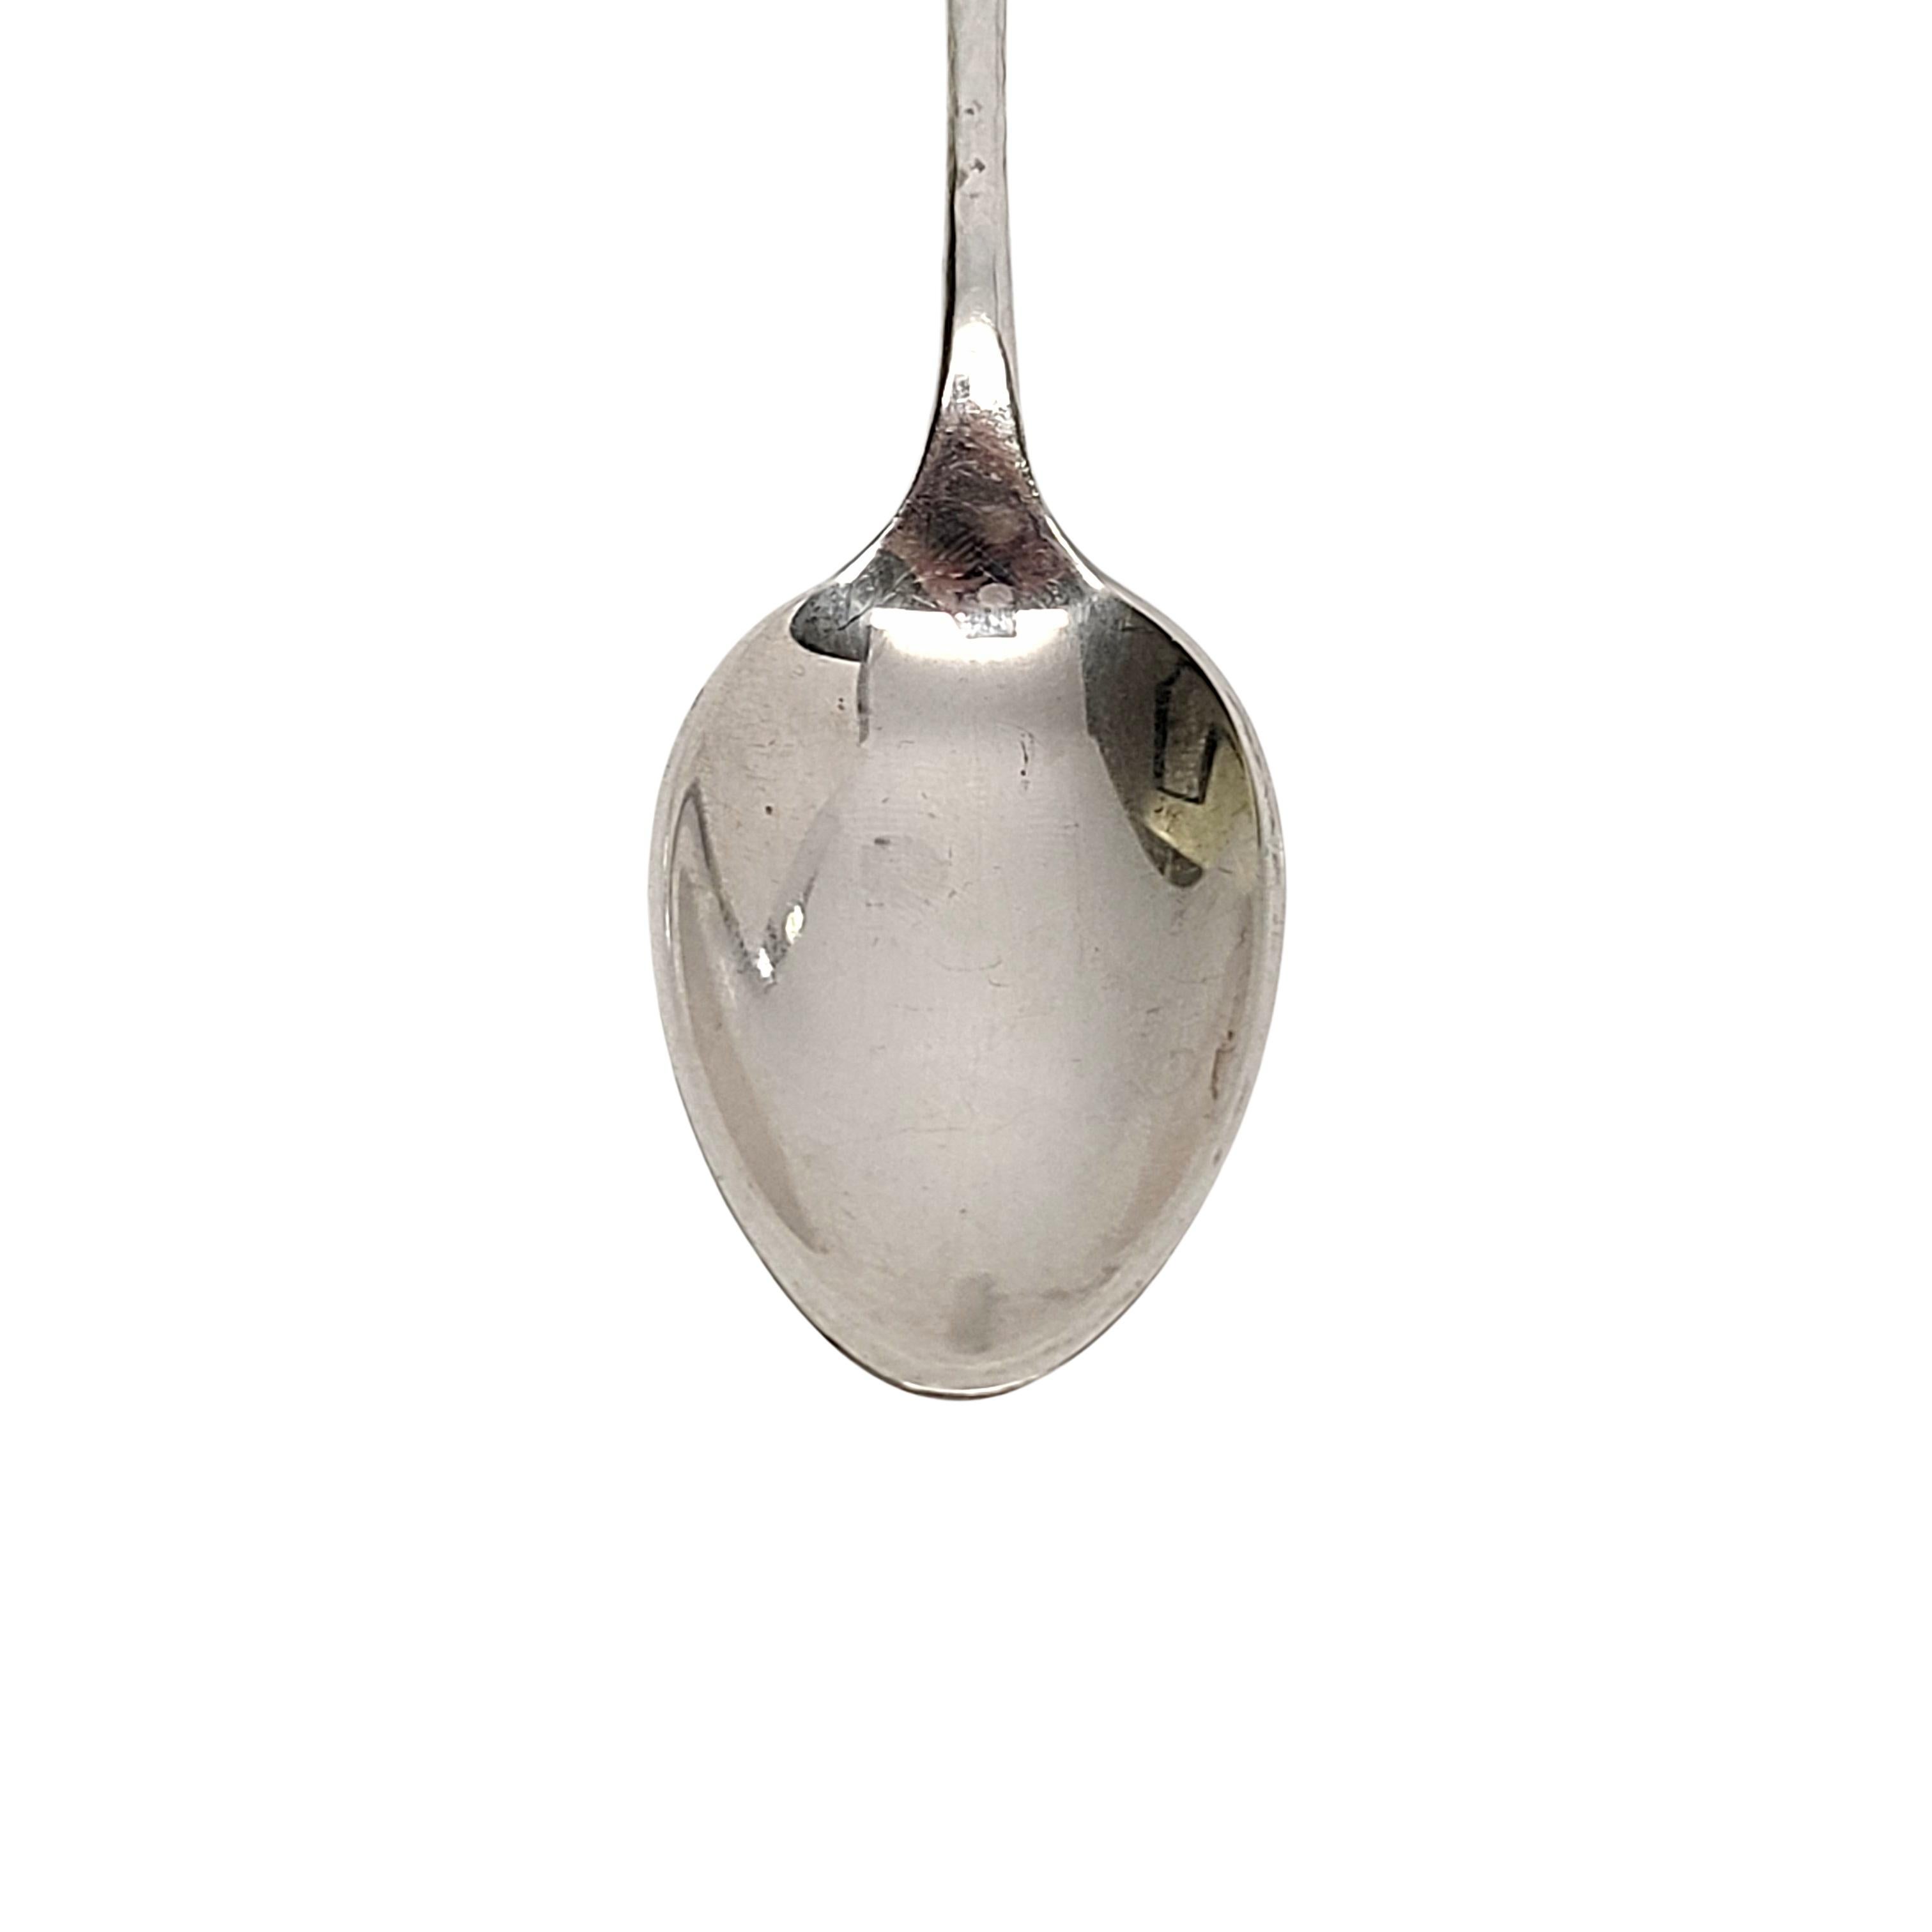 Whiting Aesthetic Movement Mixed Metals Sterling Applied Cherries Teaspoon In Good Condition For Sale In Washington Depot, CT